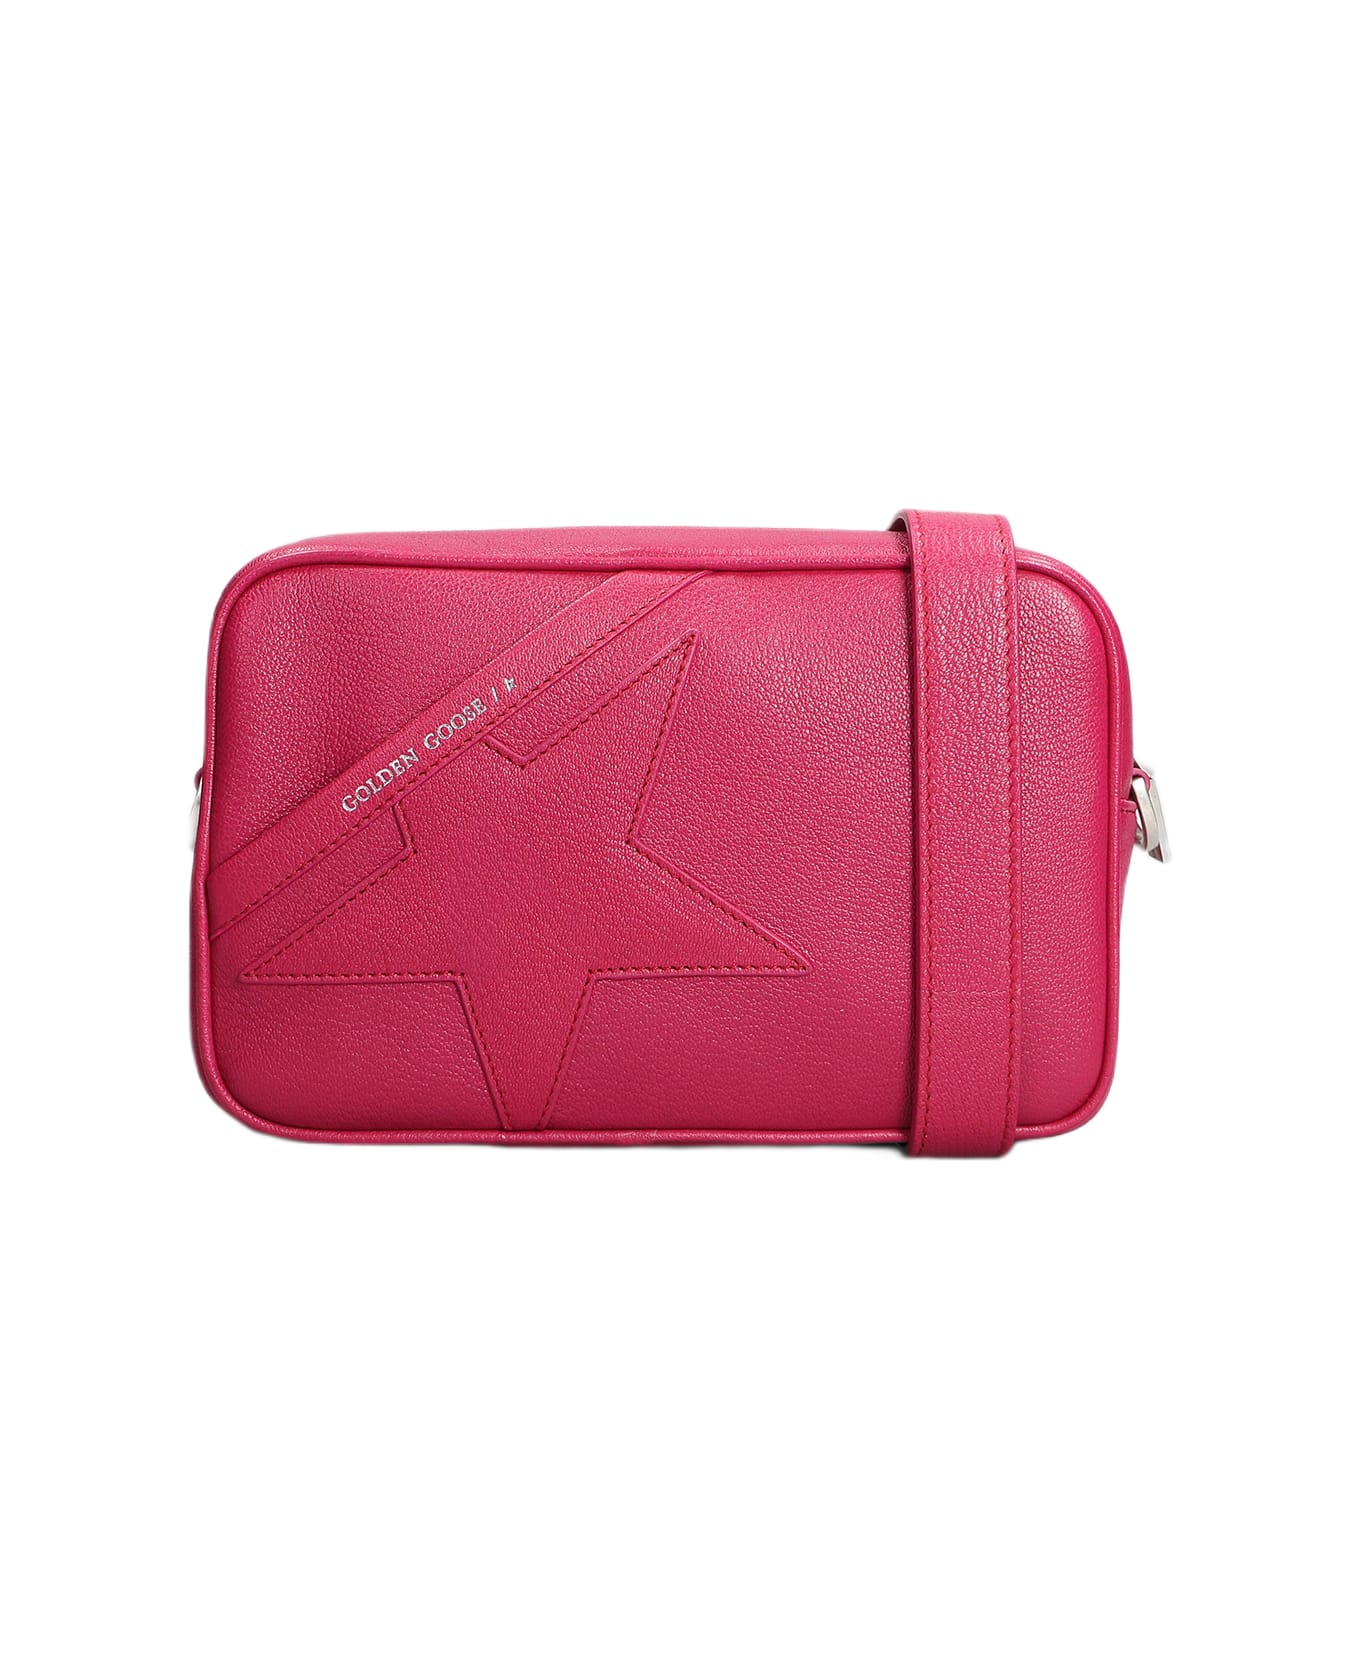 Golden Goose Shoulder Bag In Fuxia Leather - fuxia